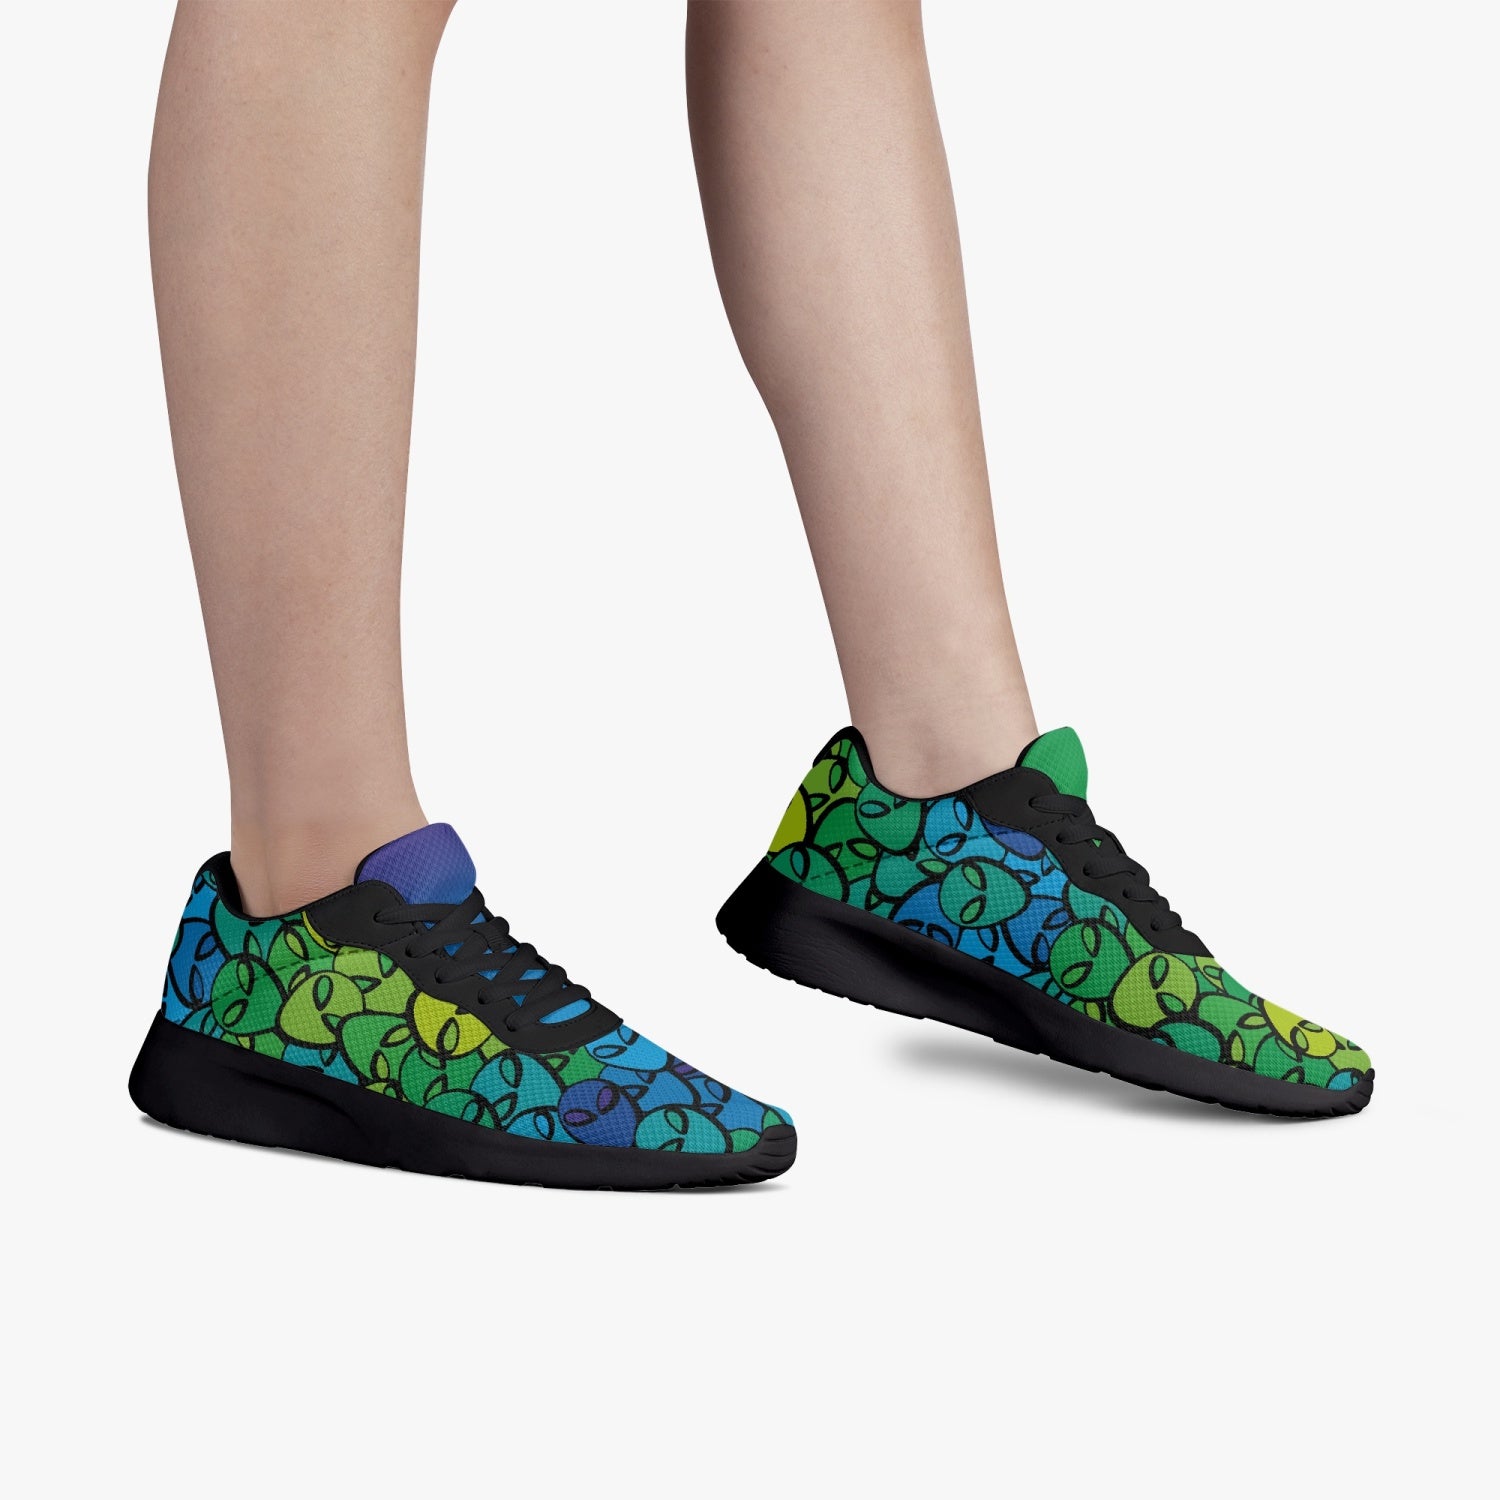 Weirdo | Weird, lifestyle mesh running shoes for woman who like aliens! These shoes have aliens printed all over the shoes.